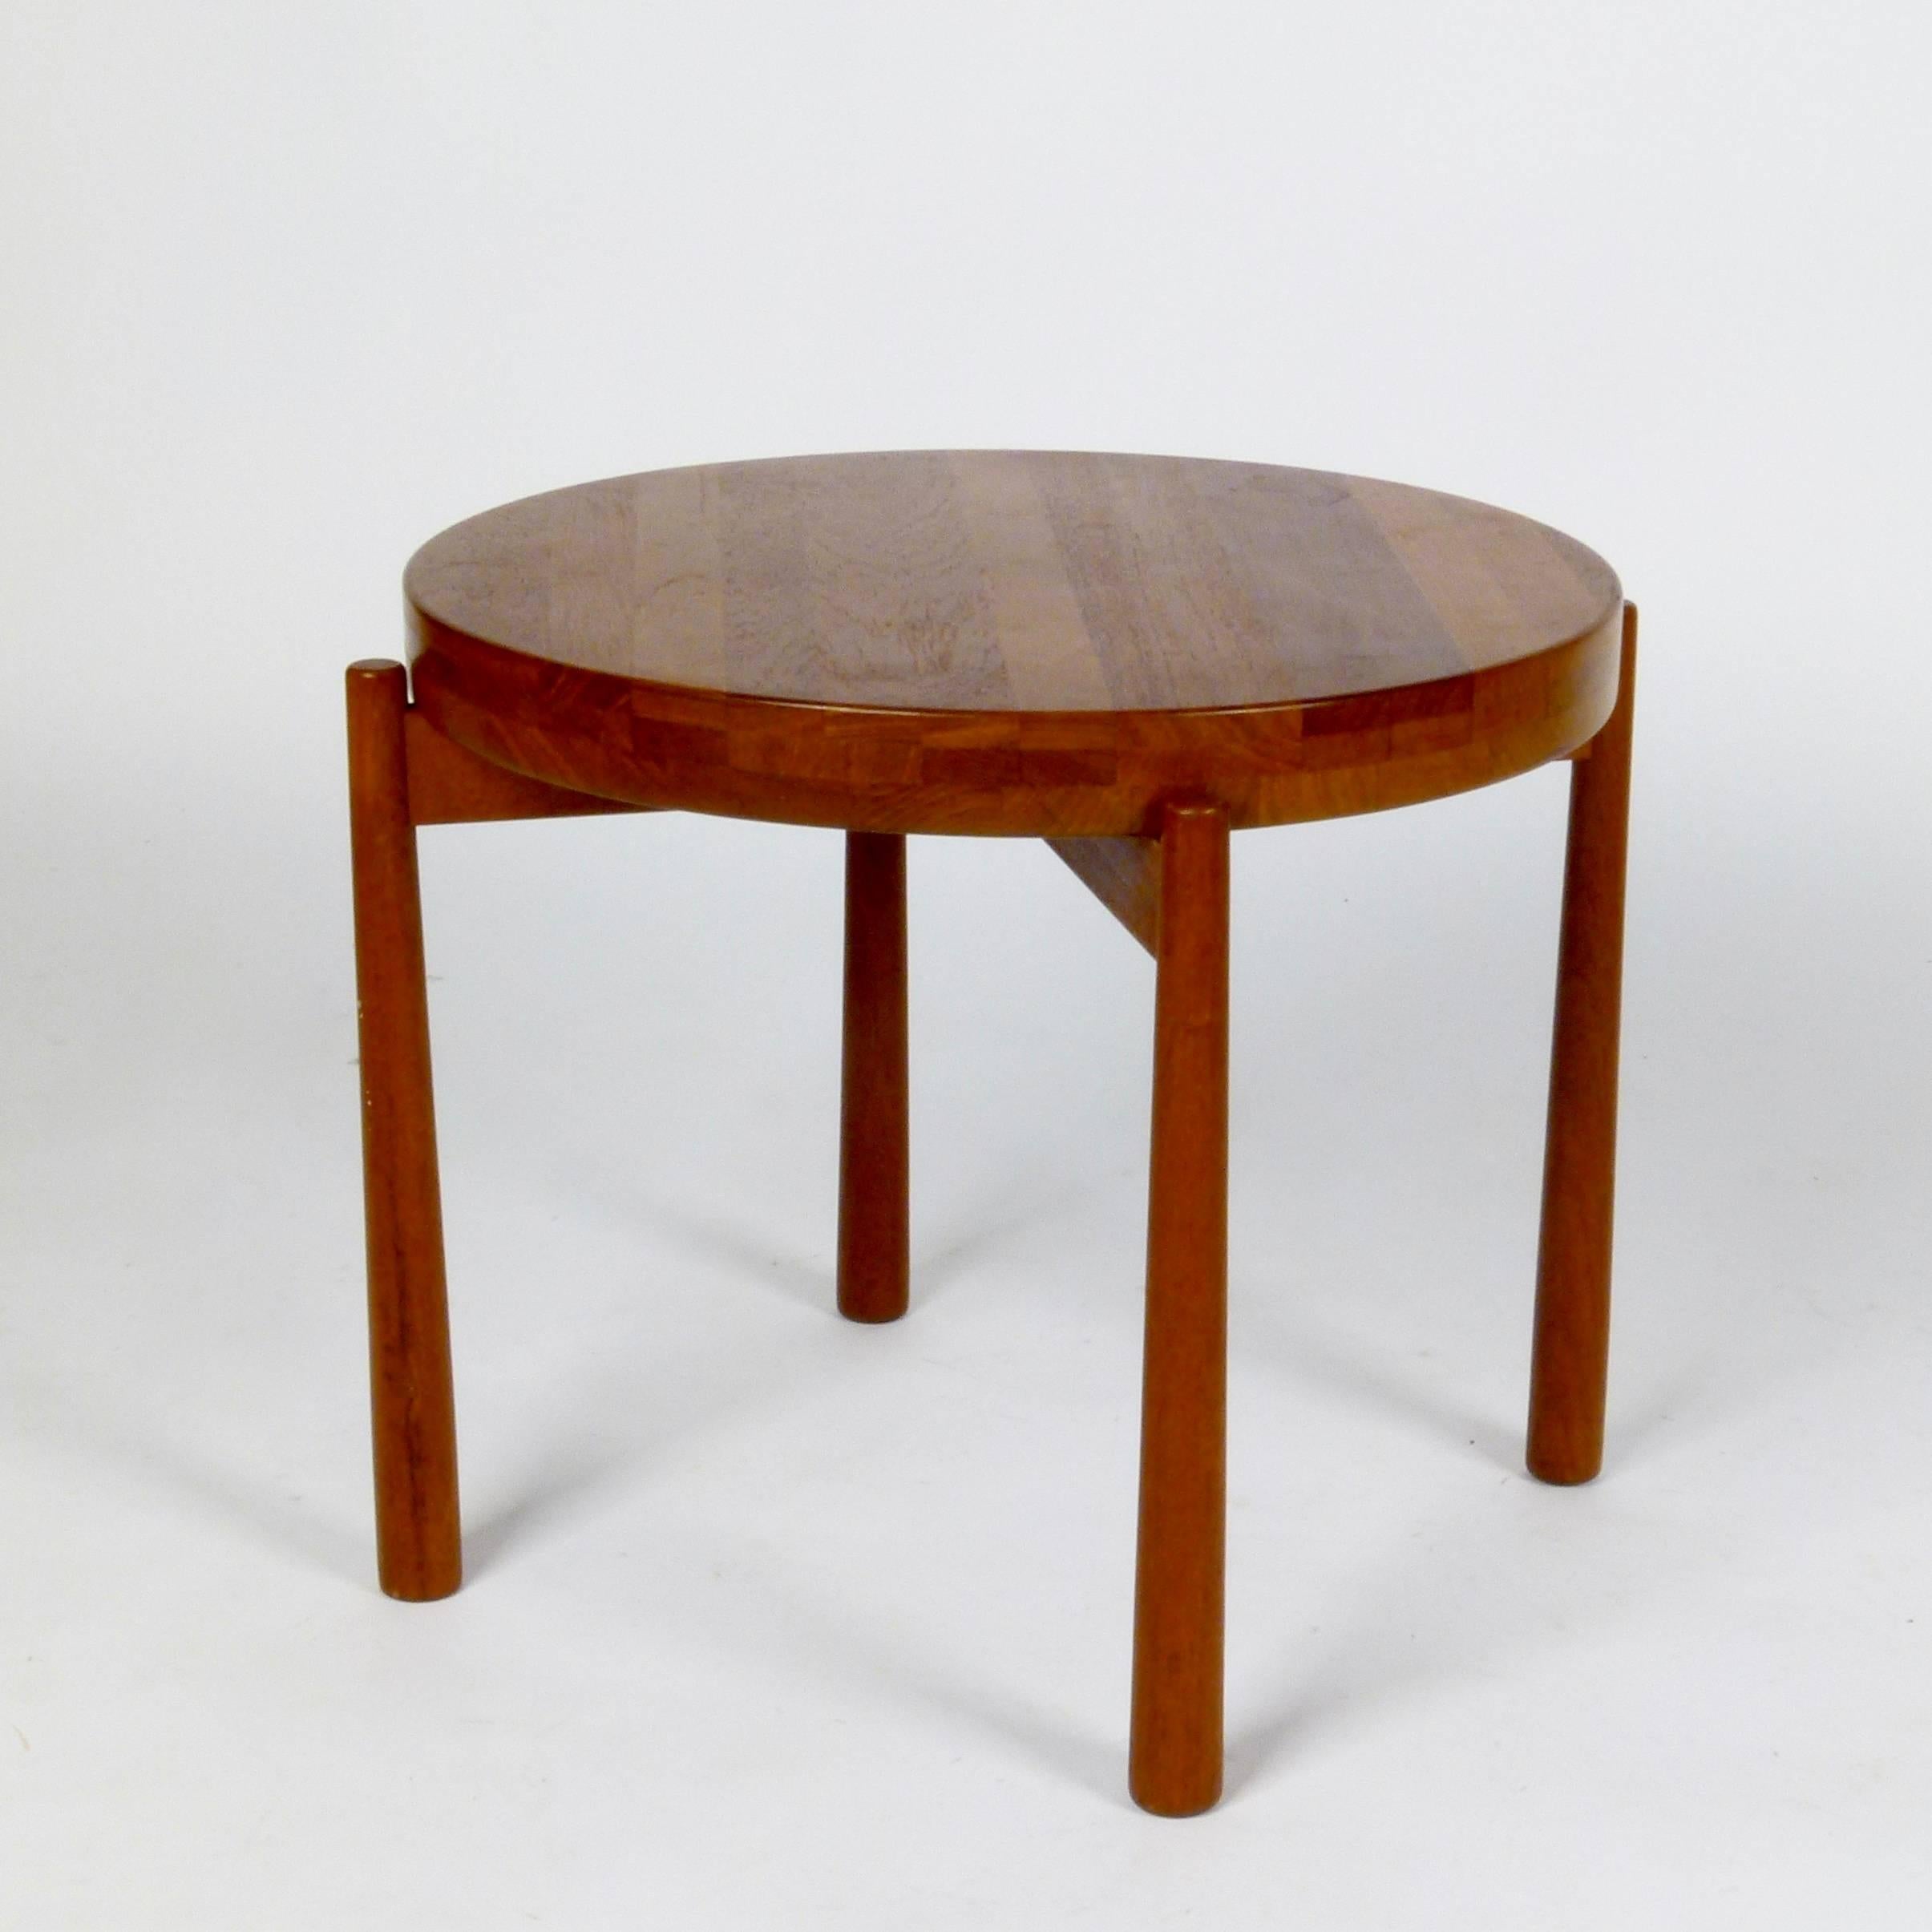 Beautifully crafted, 1960s solid teak table with flip-top and reverse tapered legs designed by Jens Quistgaard for DUX of Sweden.